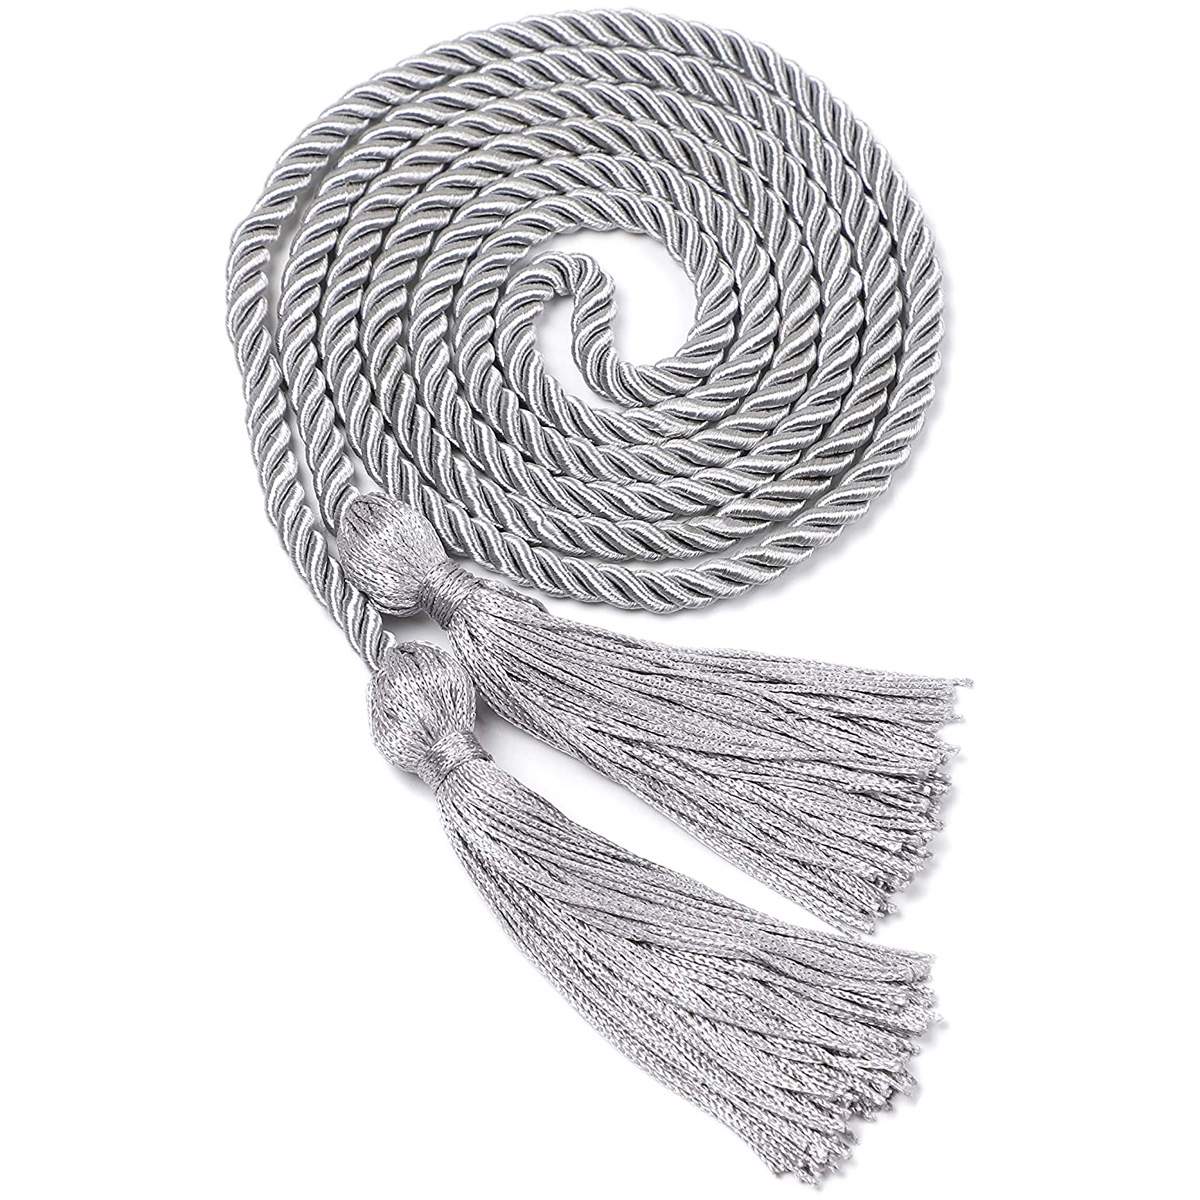 Cords Tassels Cords Polyester Yarn Honor Cord for Graduation Students 63 Inchs Long (Silver)